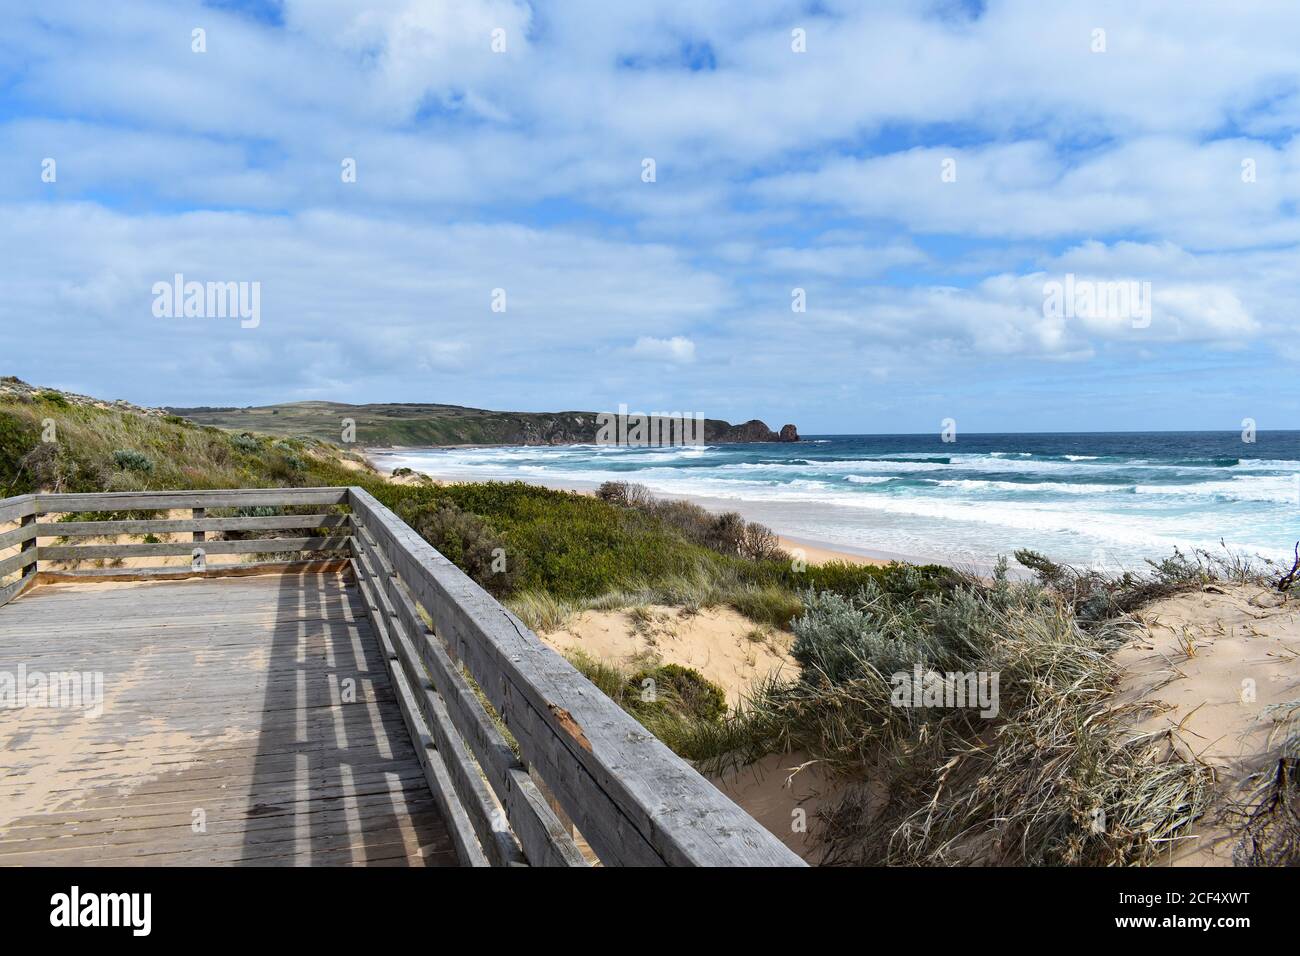 A wooden viewing platform overlooks Cape Woolamai Beach on Phillip Island.  Grass is growing from the sand and the ocean is bright blue in colour. Stock Photo